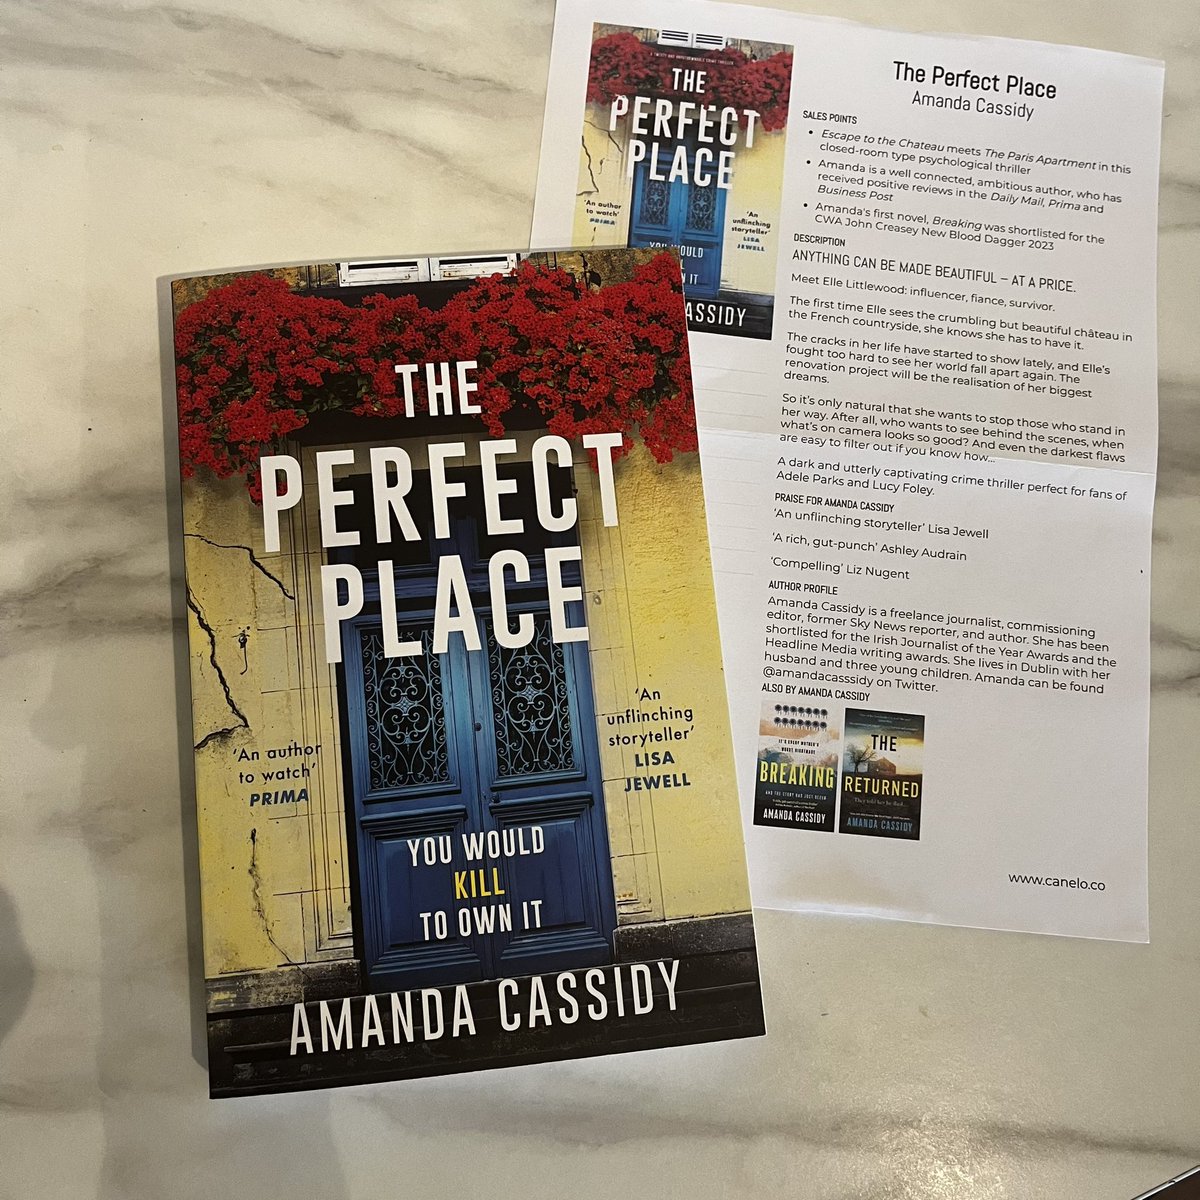 Huge thanks to @CaneloCrime for sending me this beautiful copy of #ThePerfectPlace by @AmandaCasssidy which is out in August. Can’t wait to read it! ❤️📚